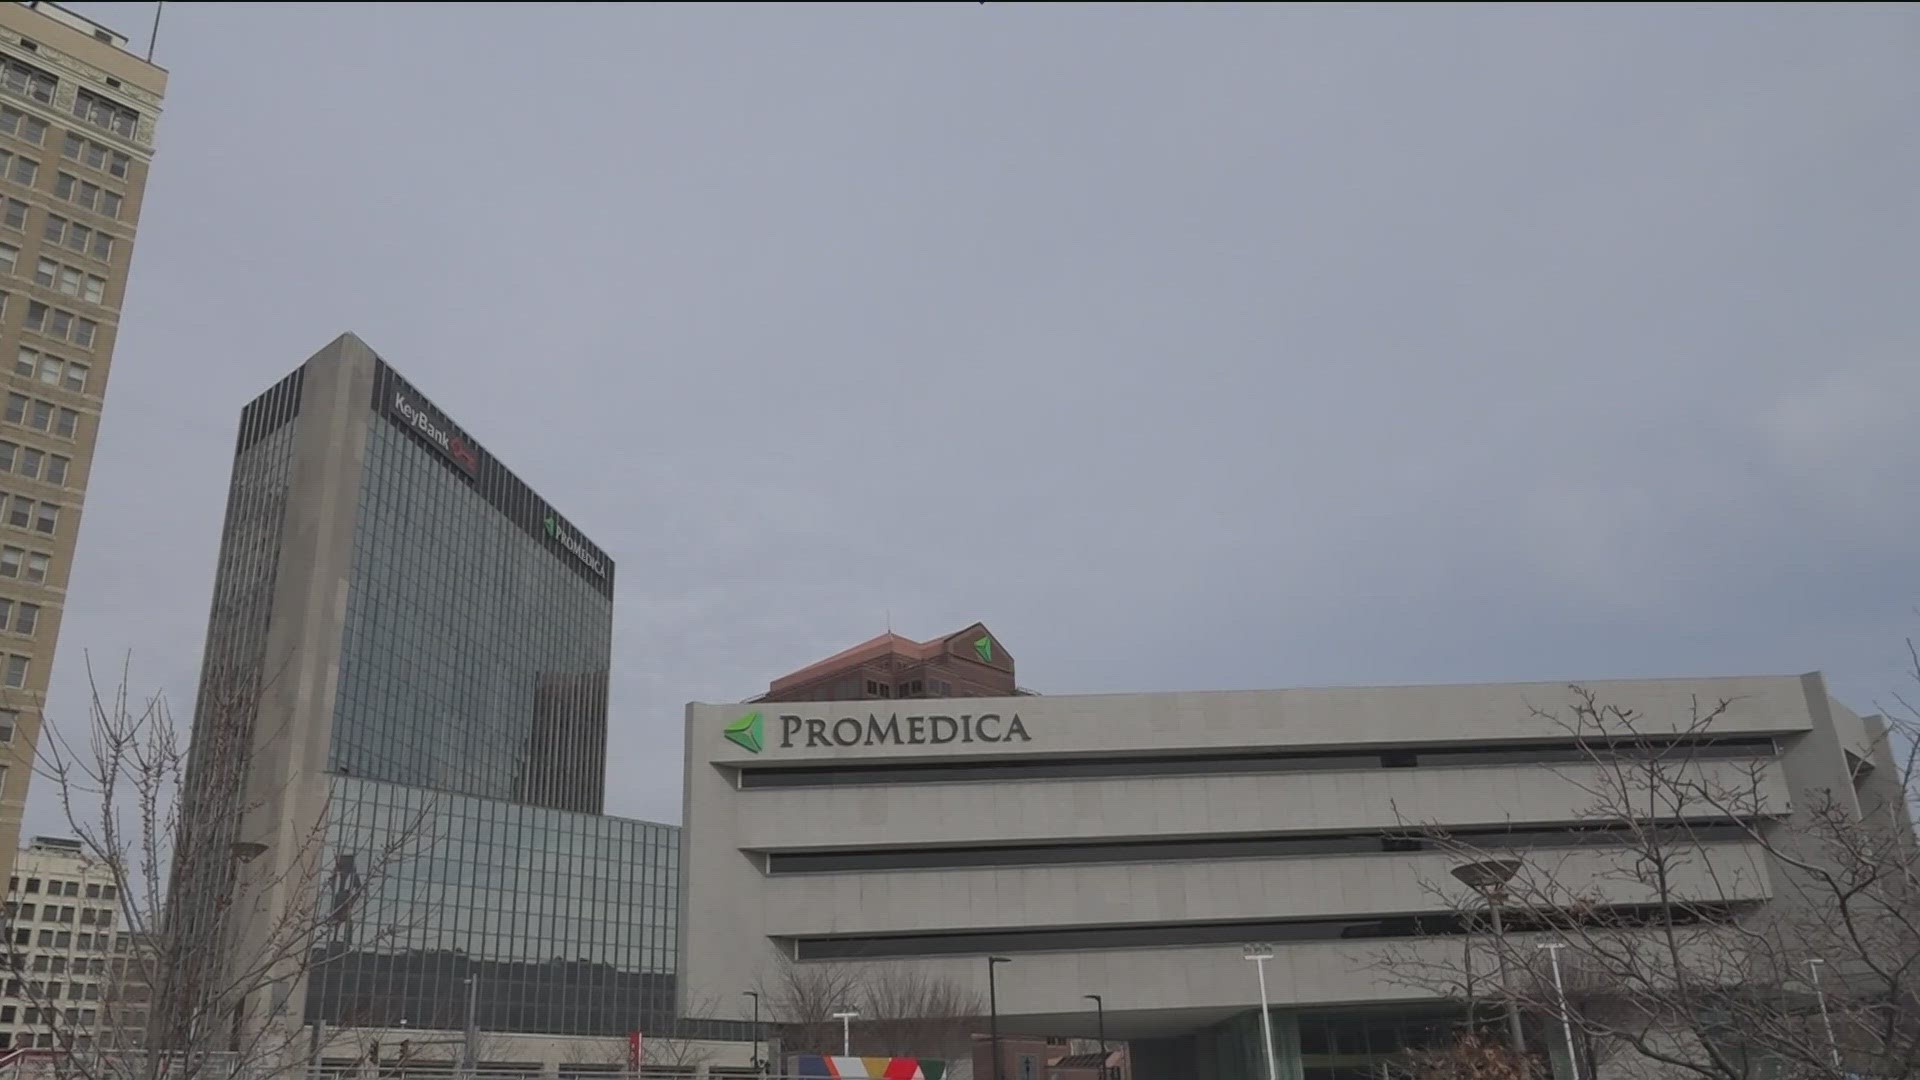 The changes are anticipated to take place by Nov. 1, with ProMedica Home Health in Sylvania shifting to serve pediatric patients only, a spokesperson said.